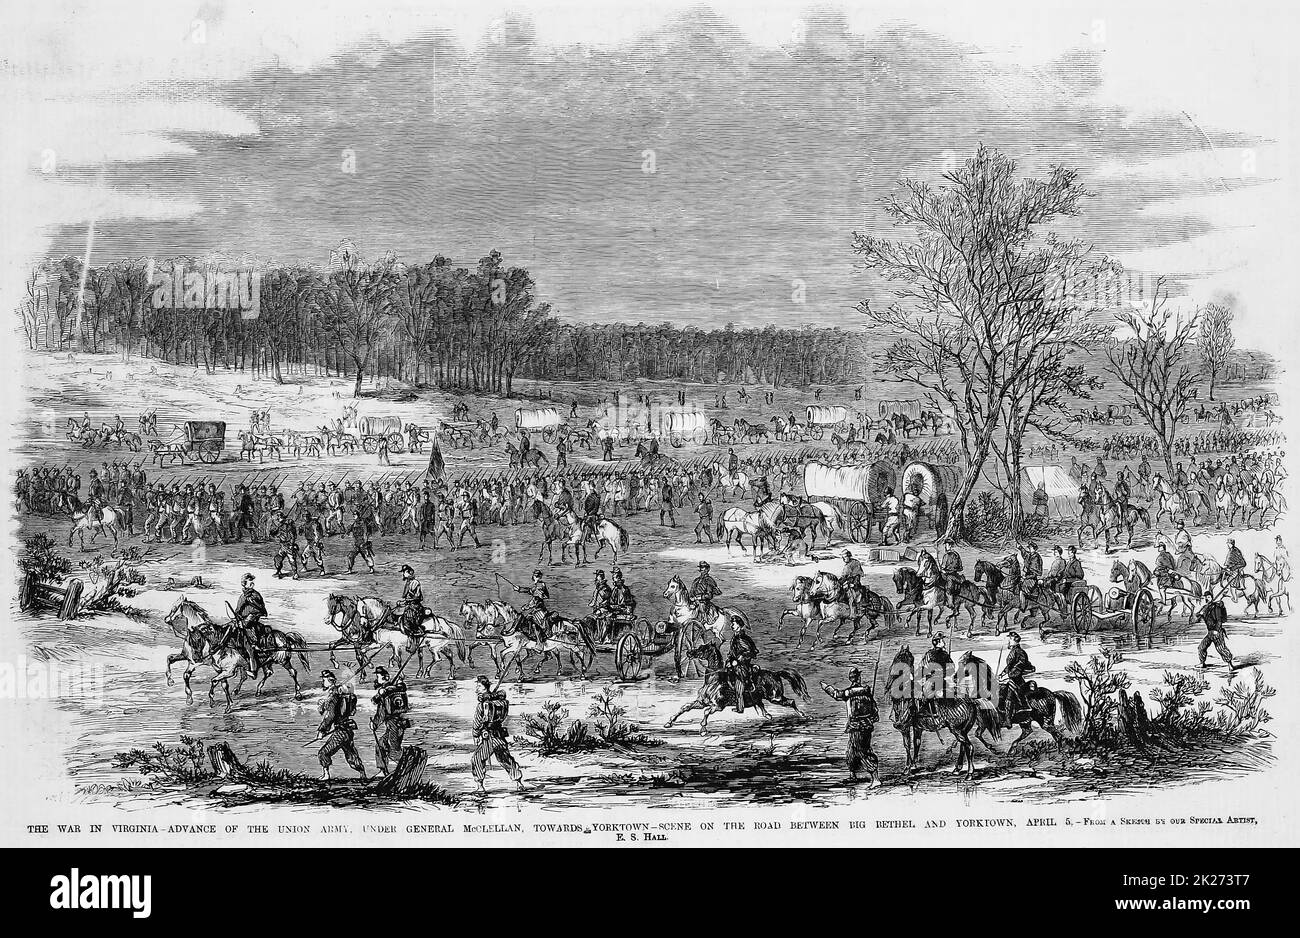 The War in Virginia - Advance of the Union Army, under General George Brinton McClellan, towards Yorktown - Scene on the road between Big Bethel and Yorktown, April 5th, 1862. 19th century American Civil War illustration from Frank Leslie's Illustrated Newspaper Stock Photo